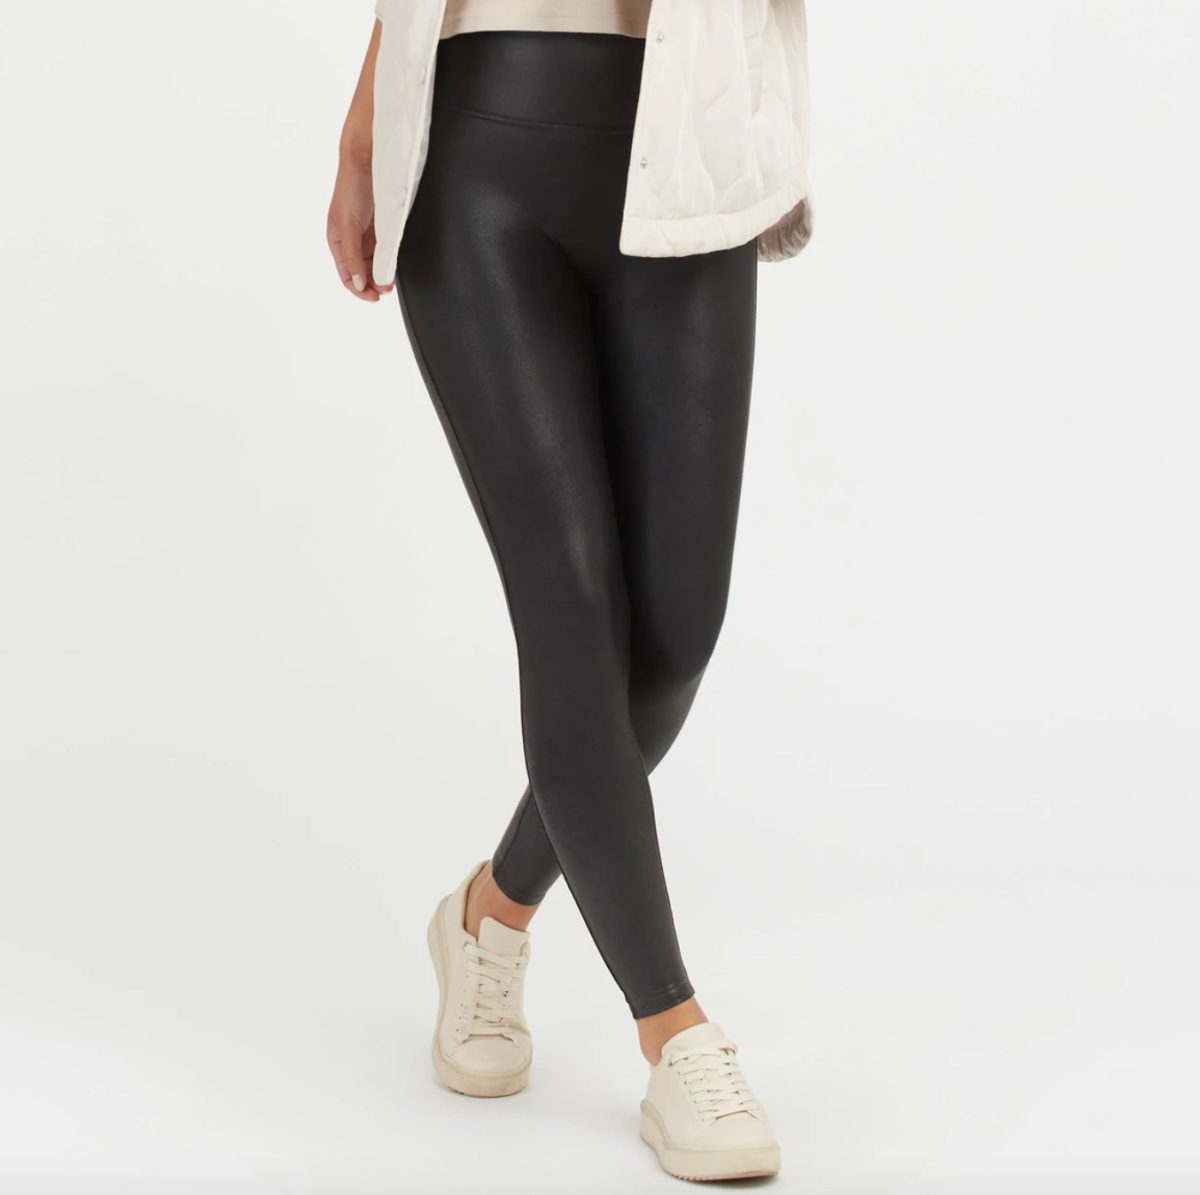 if you don't own a pair of spanx leggings, you're doing it wrong